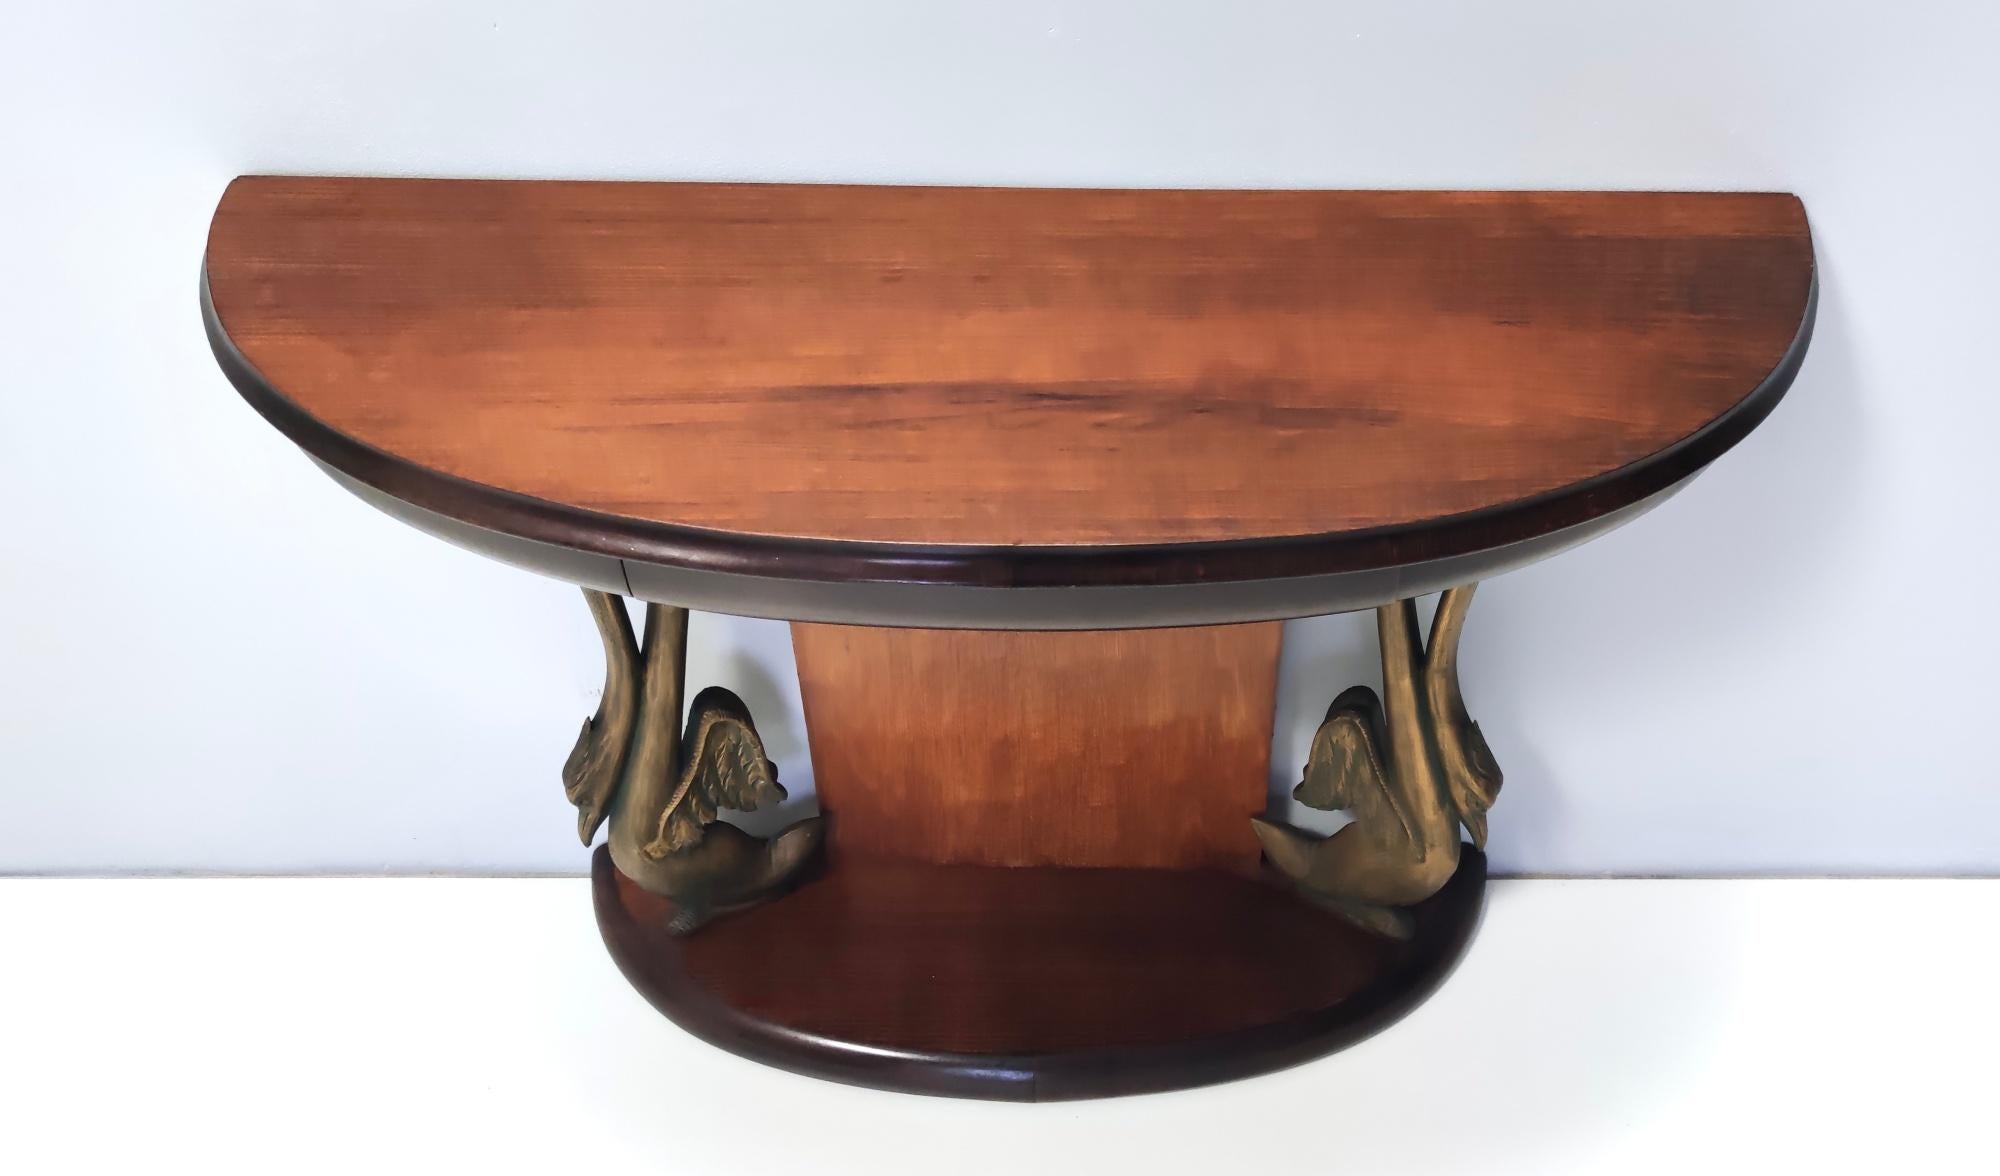 Mid-20th Century Vintage Sculptural Swan Motif Canaletto Walnut Console Table by Dassi, Italy